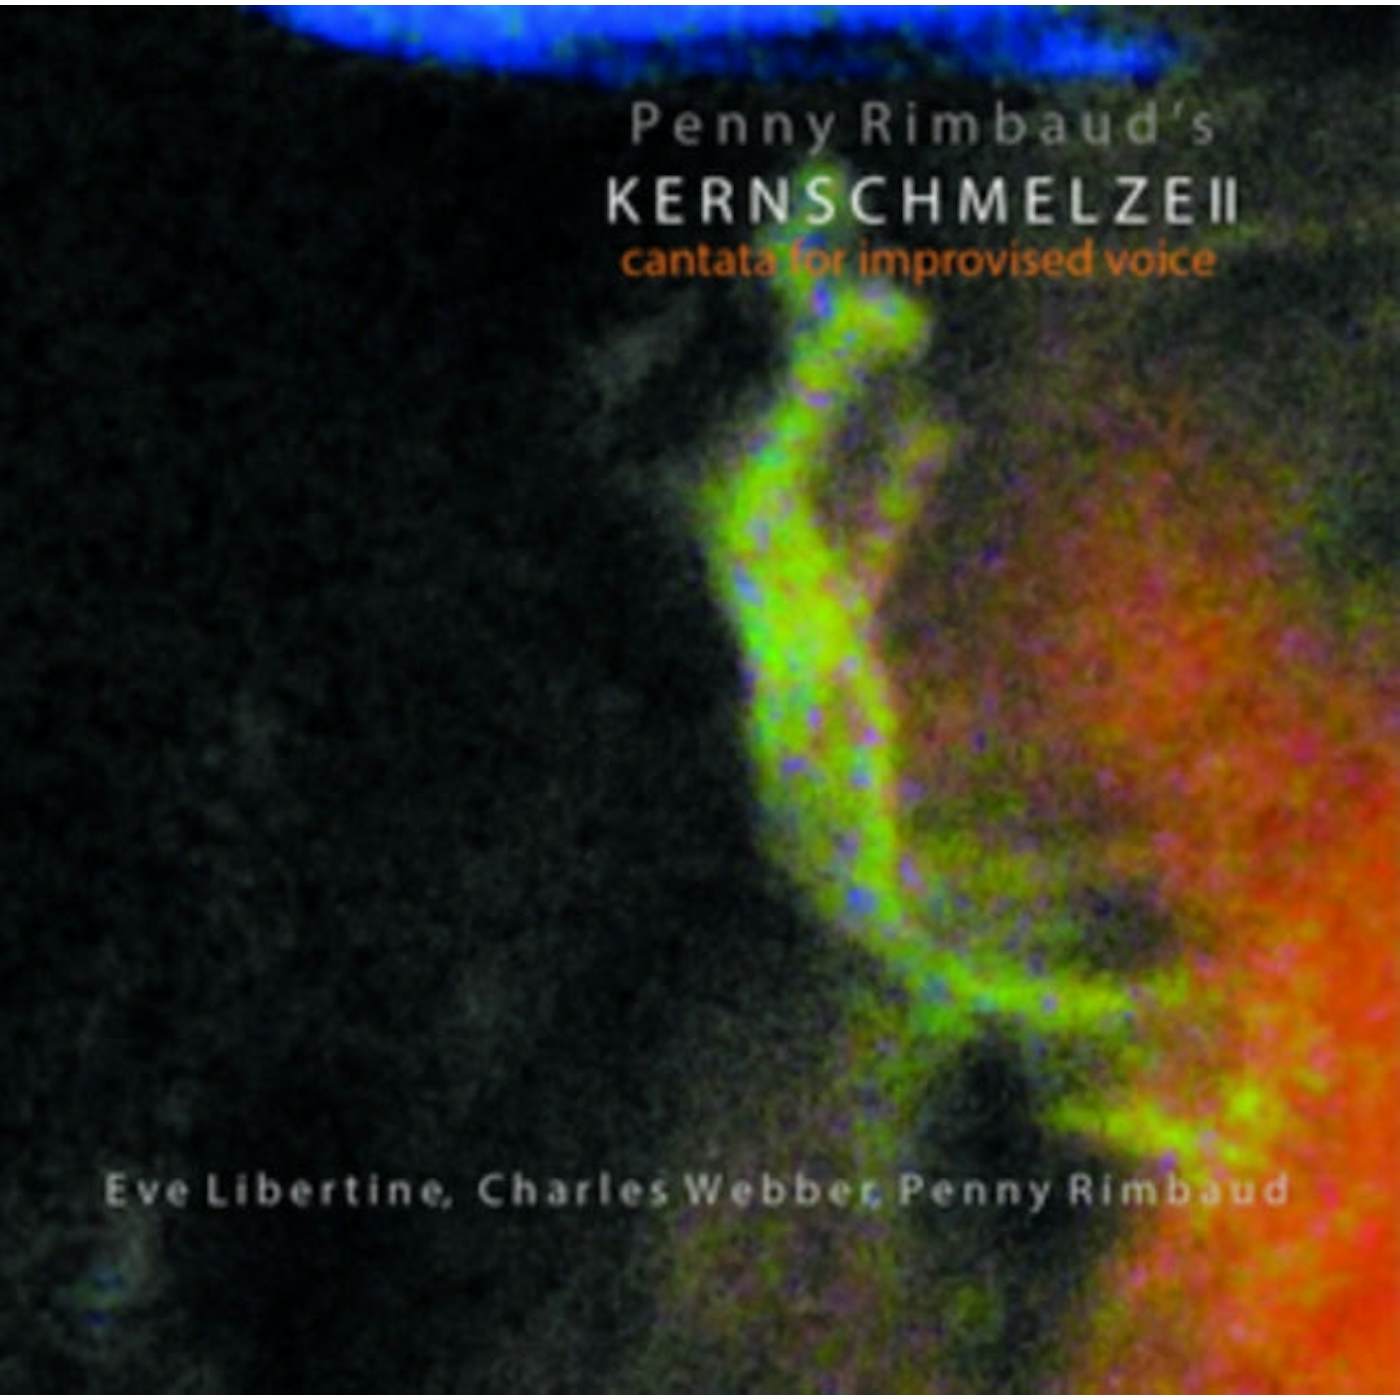 Penny Rimbaud CD - Kernschmelze Ii Cantata For Improvised Voice